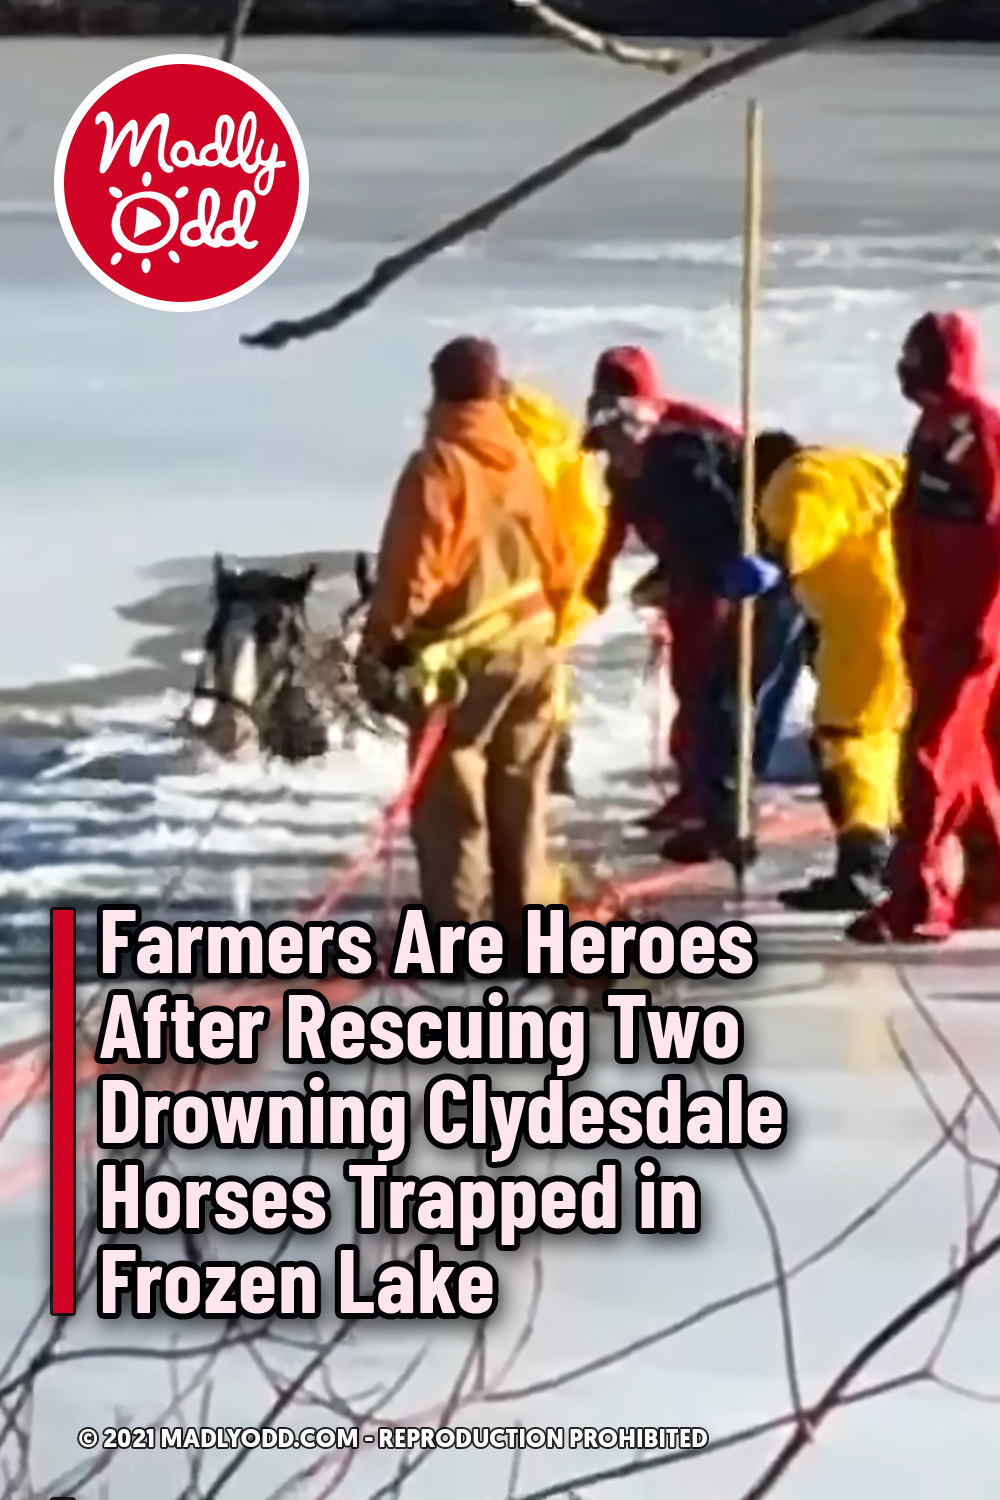 Farmers Are Heroes After Rescuing Two Drowning Clydesdale Horses Trapped in Frozen Lake